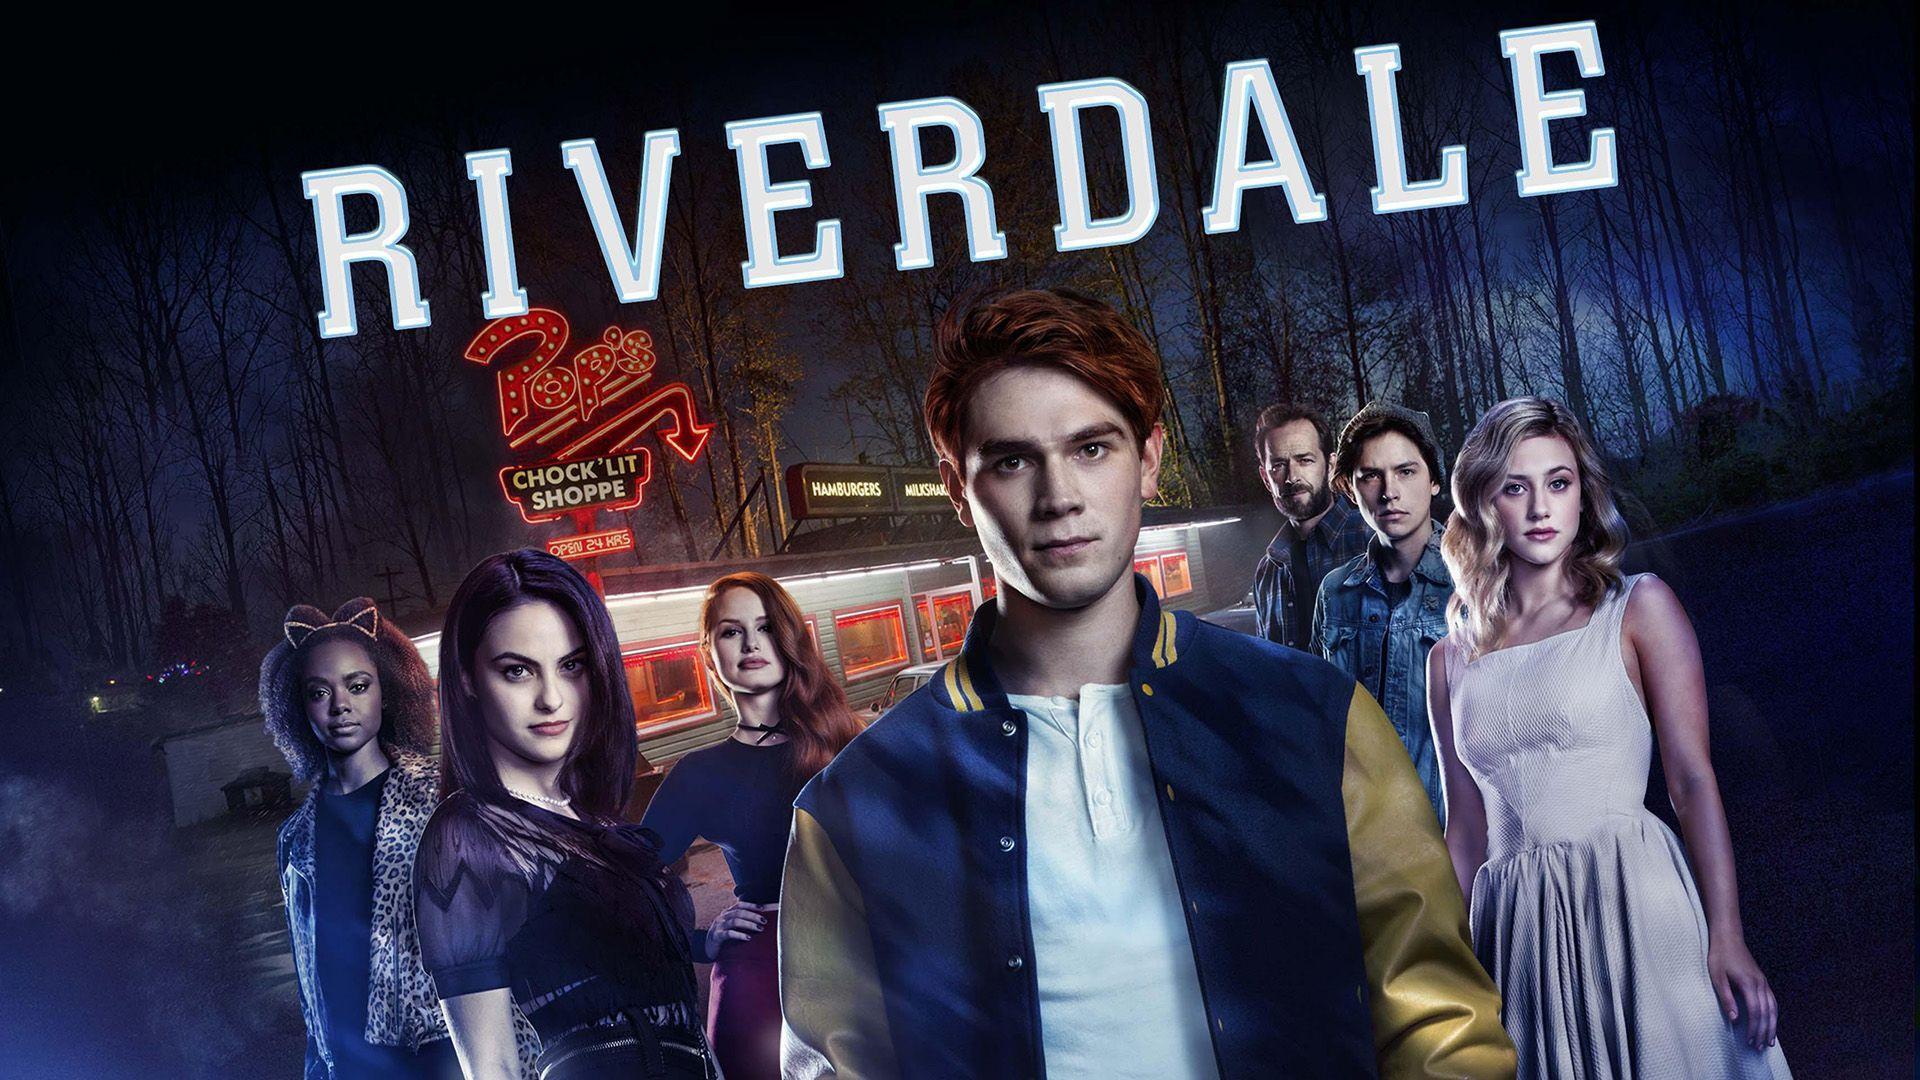 Riverdale Wallpapers - Top Free